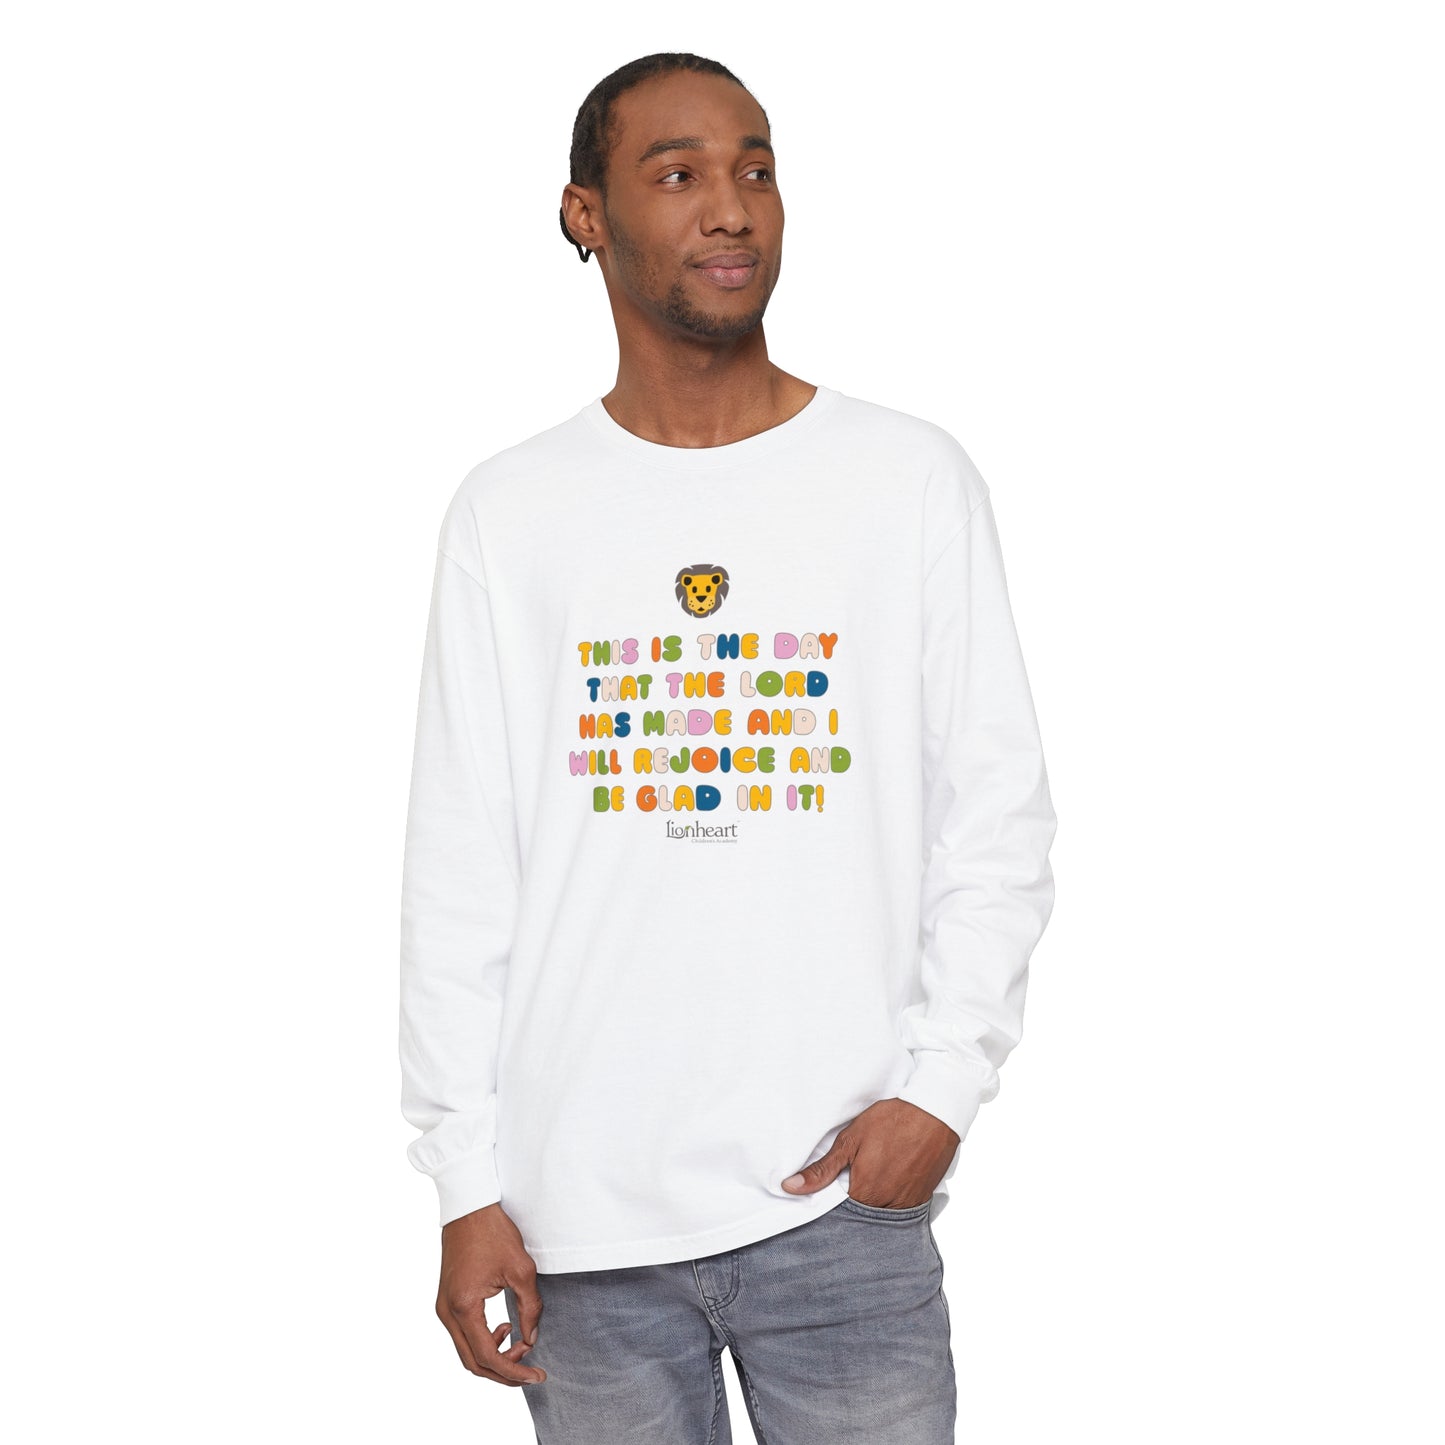 "This is the Day" Unisex Long Sleeve T-Shirt